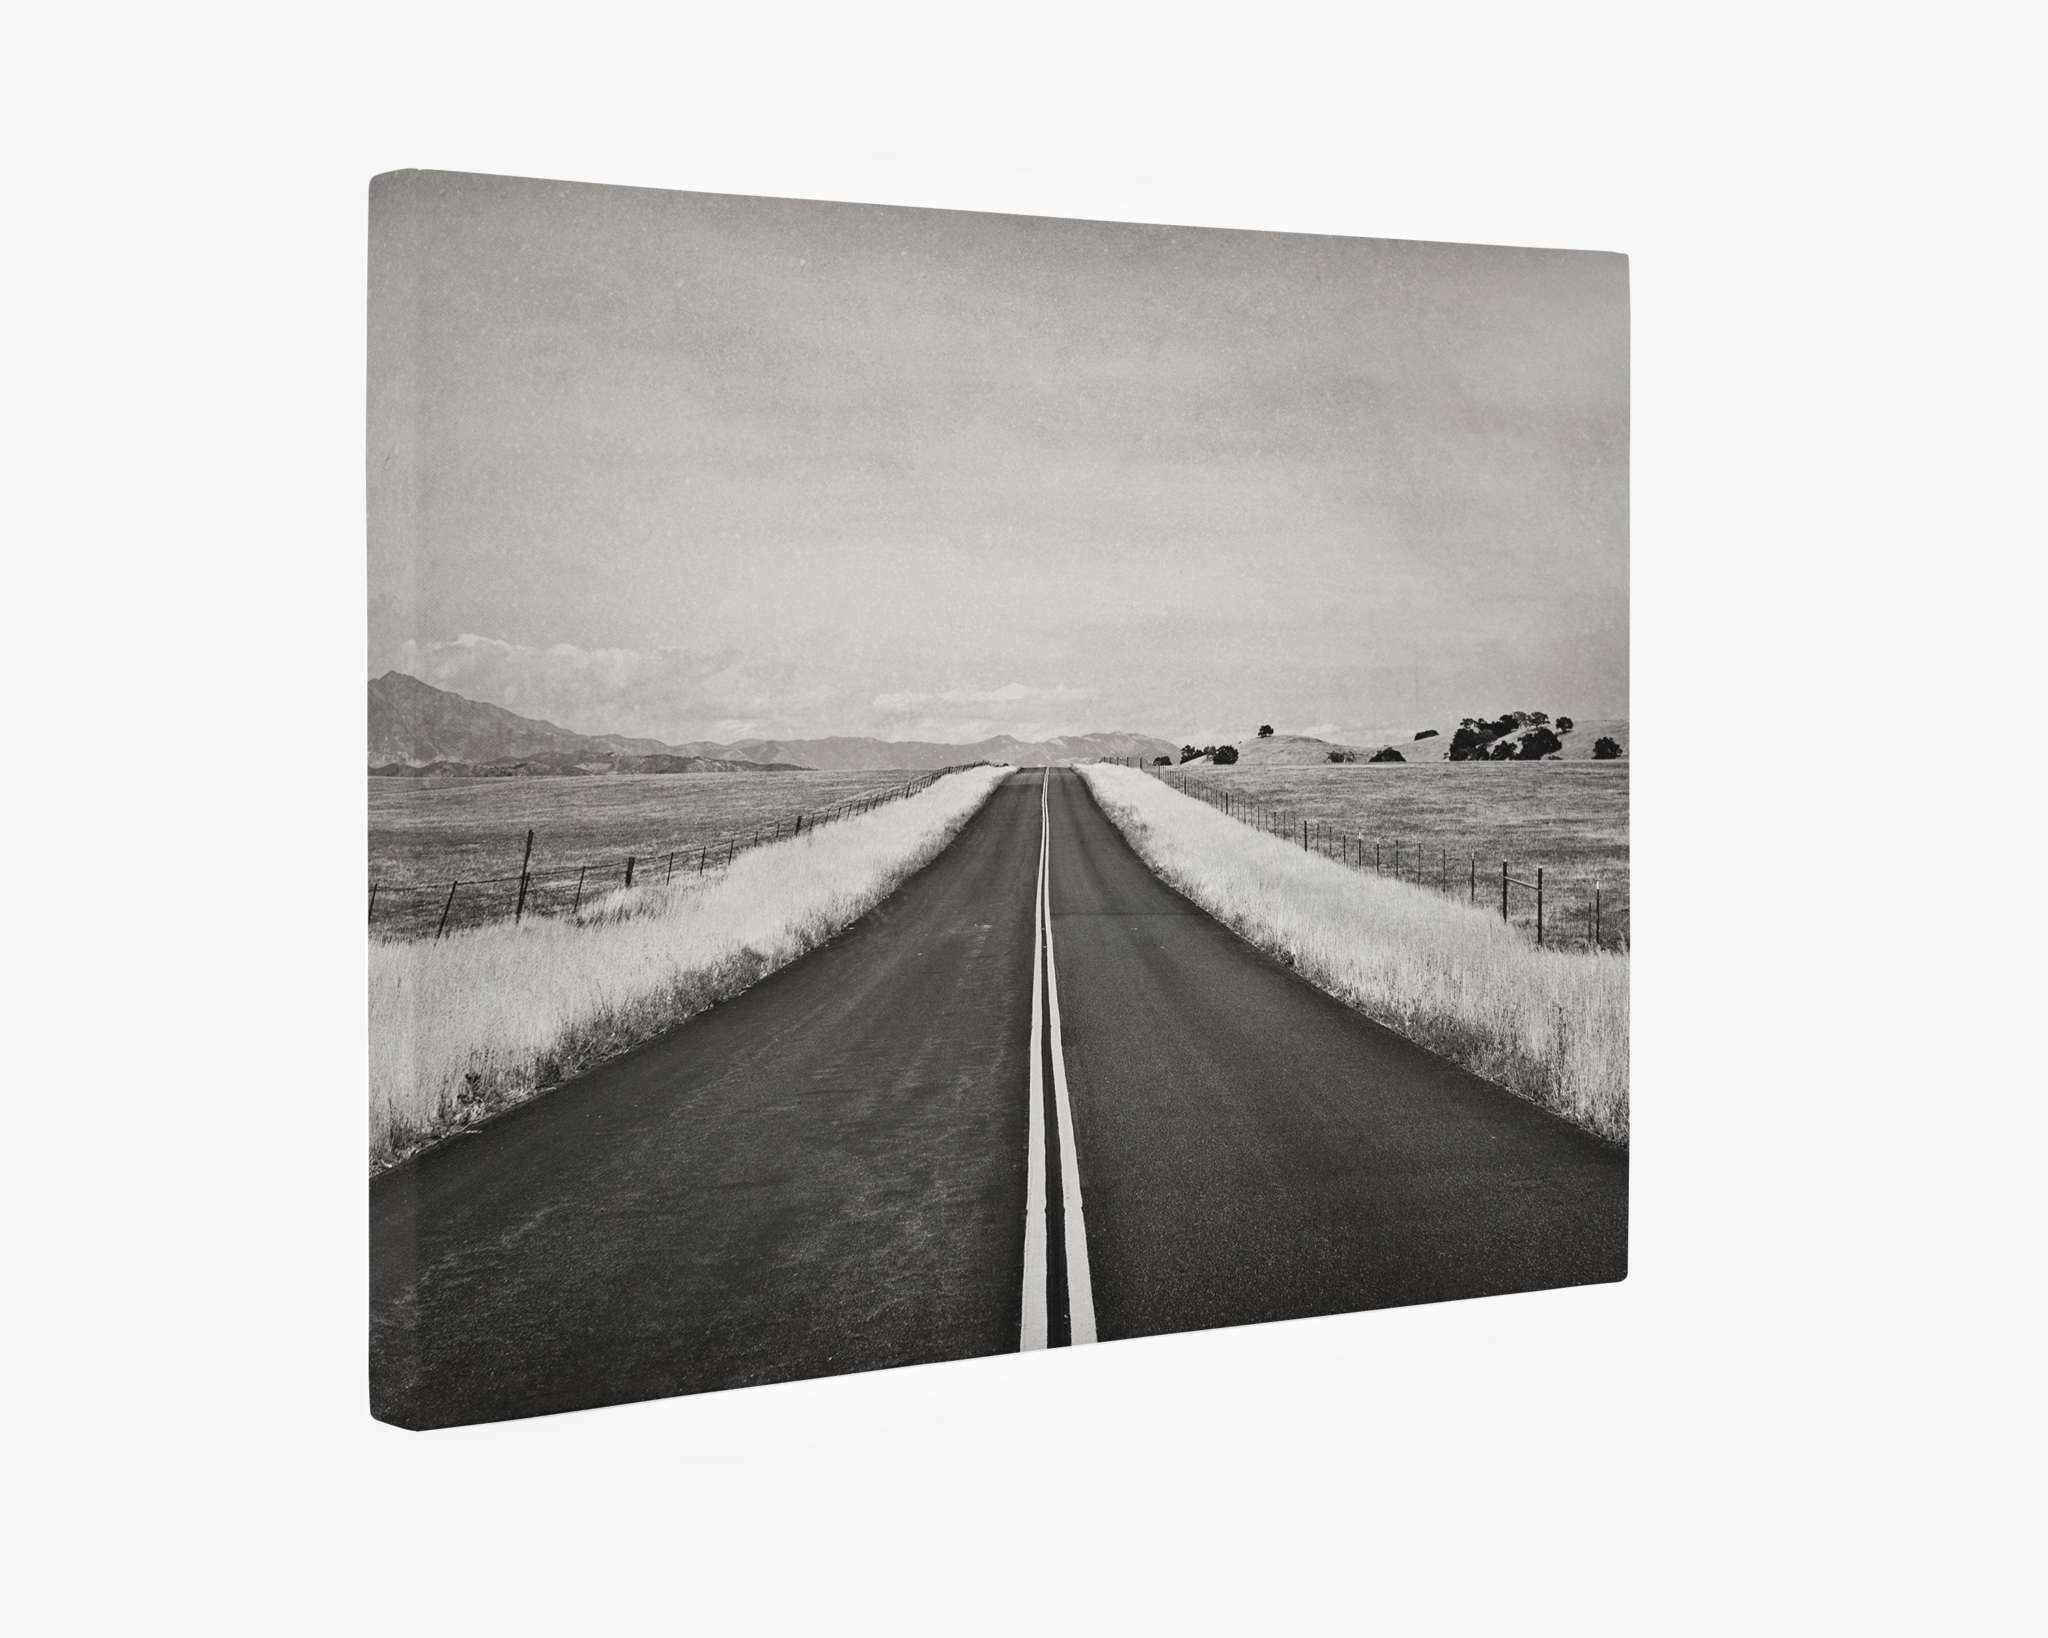 A black and white photograph, perfect as wall art, shows a long, straight road stretching into the distance. The road is flanked by grassy fields and wire fences, with distant hills barely visible under an expansive sky. This premium artist-grade canvas image, Offley Green’s Black and White Rural Landscape Canvas Art, 'American Road Trip,' evokes a sense of solitude and endless journey.